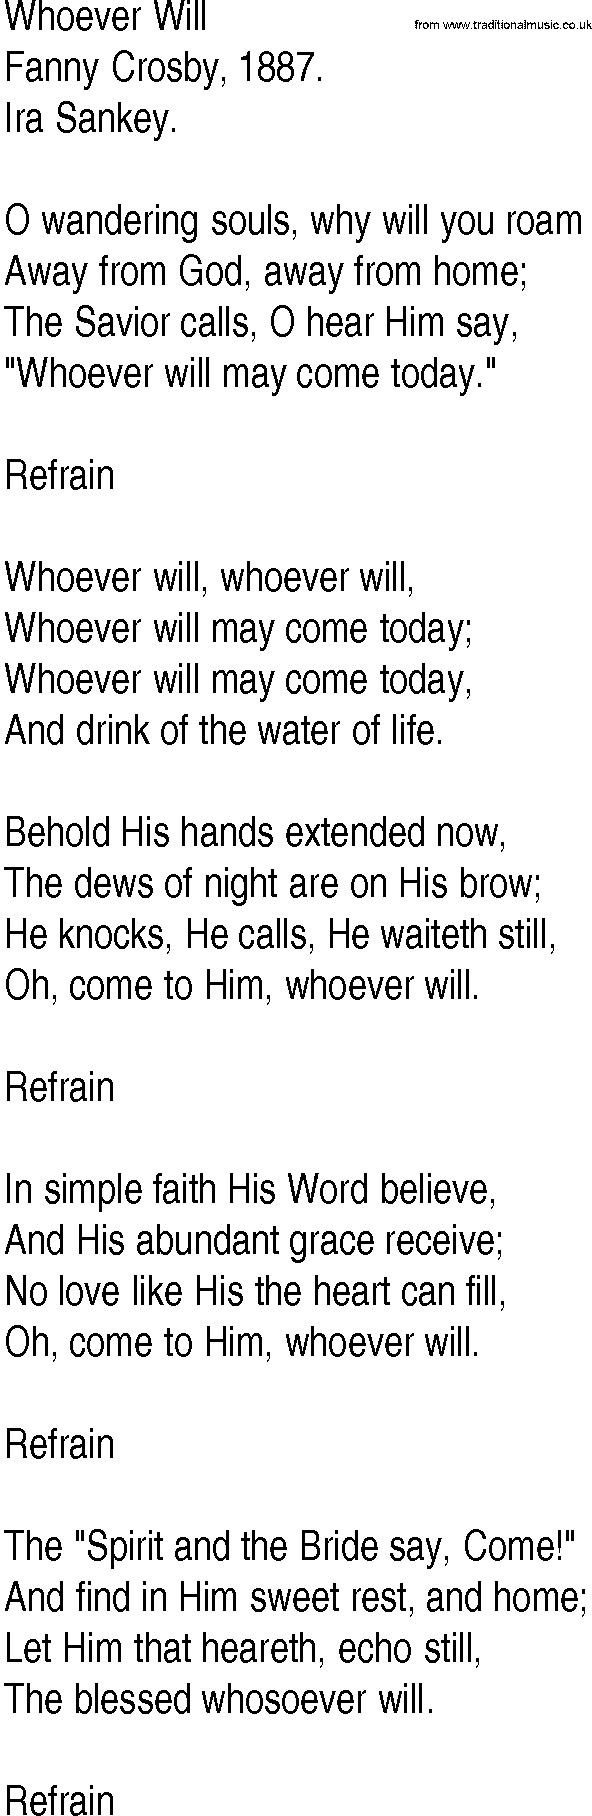 Hymn and Gospel Song: Whoever Will by Fanny Crosby lyrics